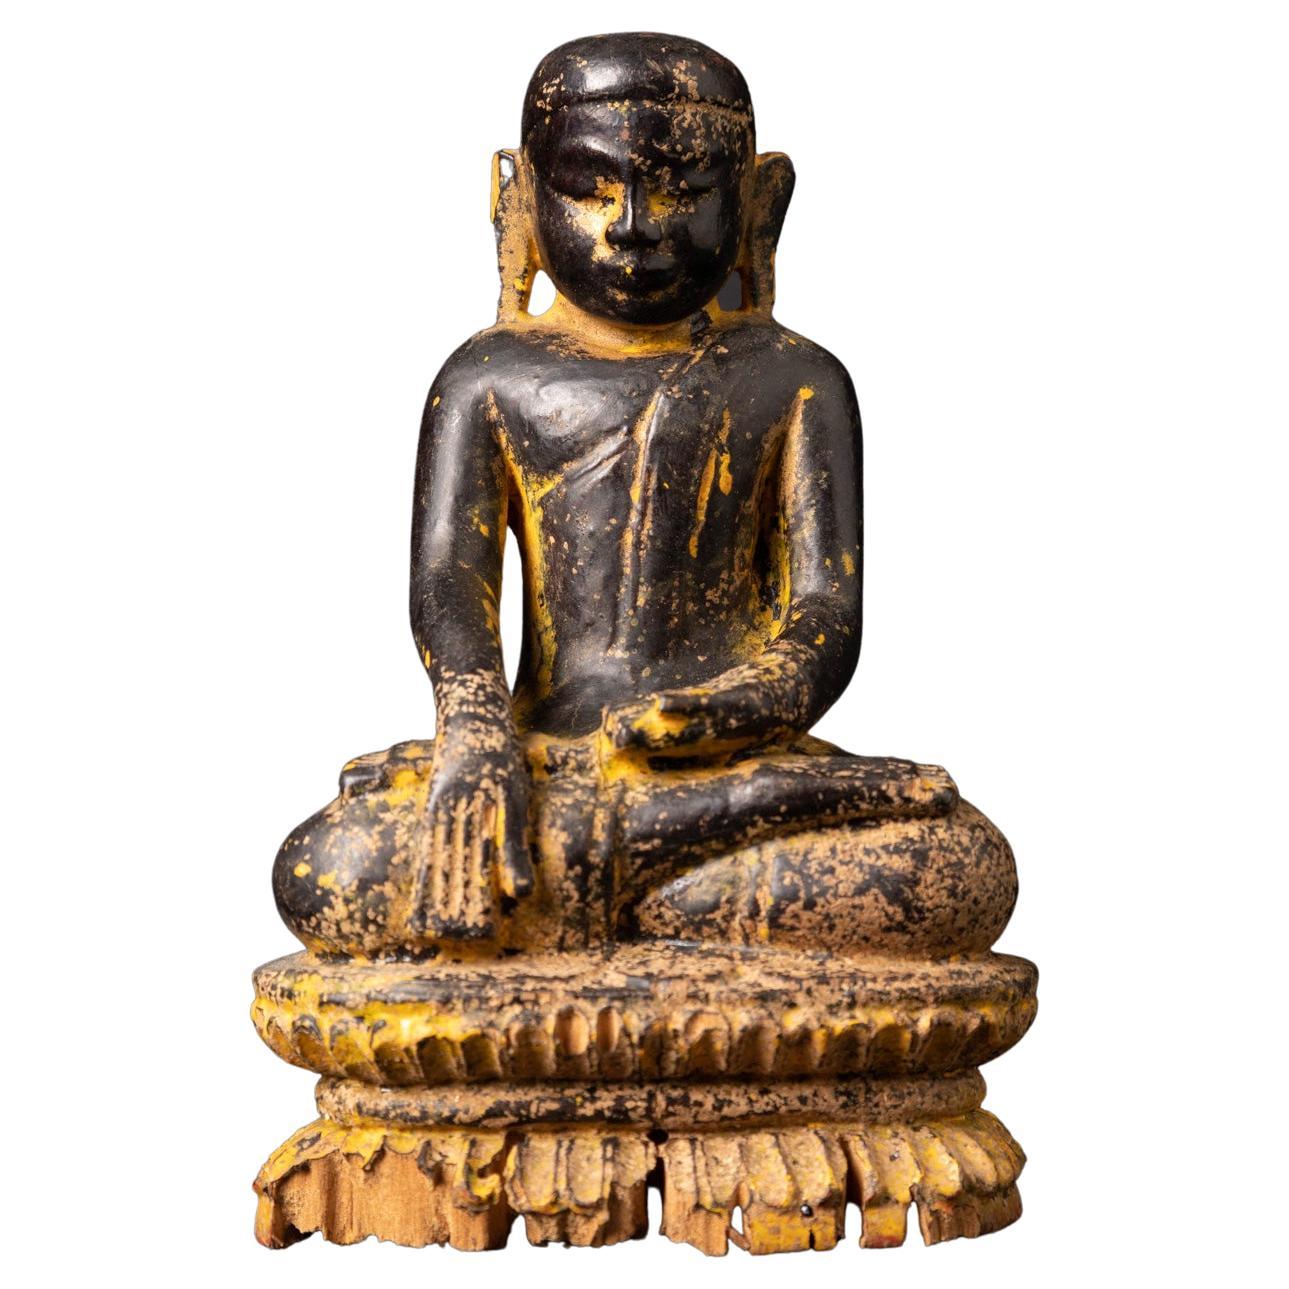 Very special 14th century antique wooden Burmese Monk statue in Bhumisparsha